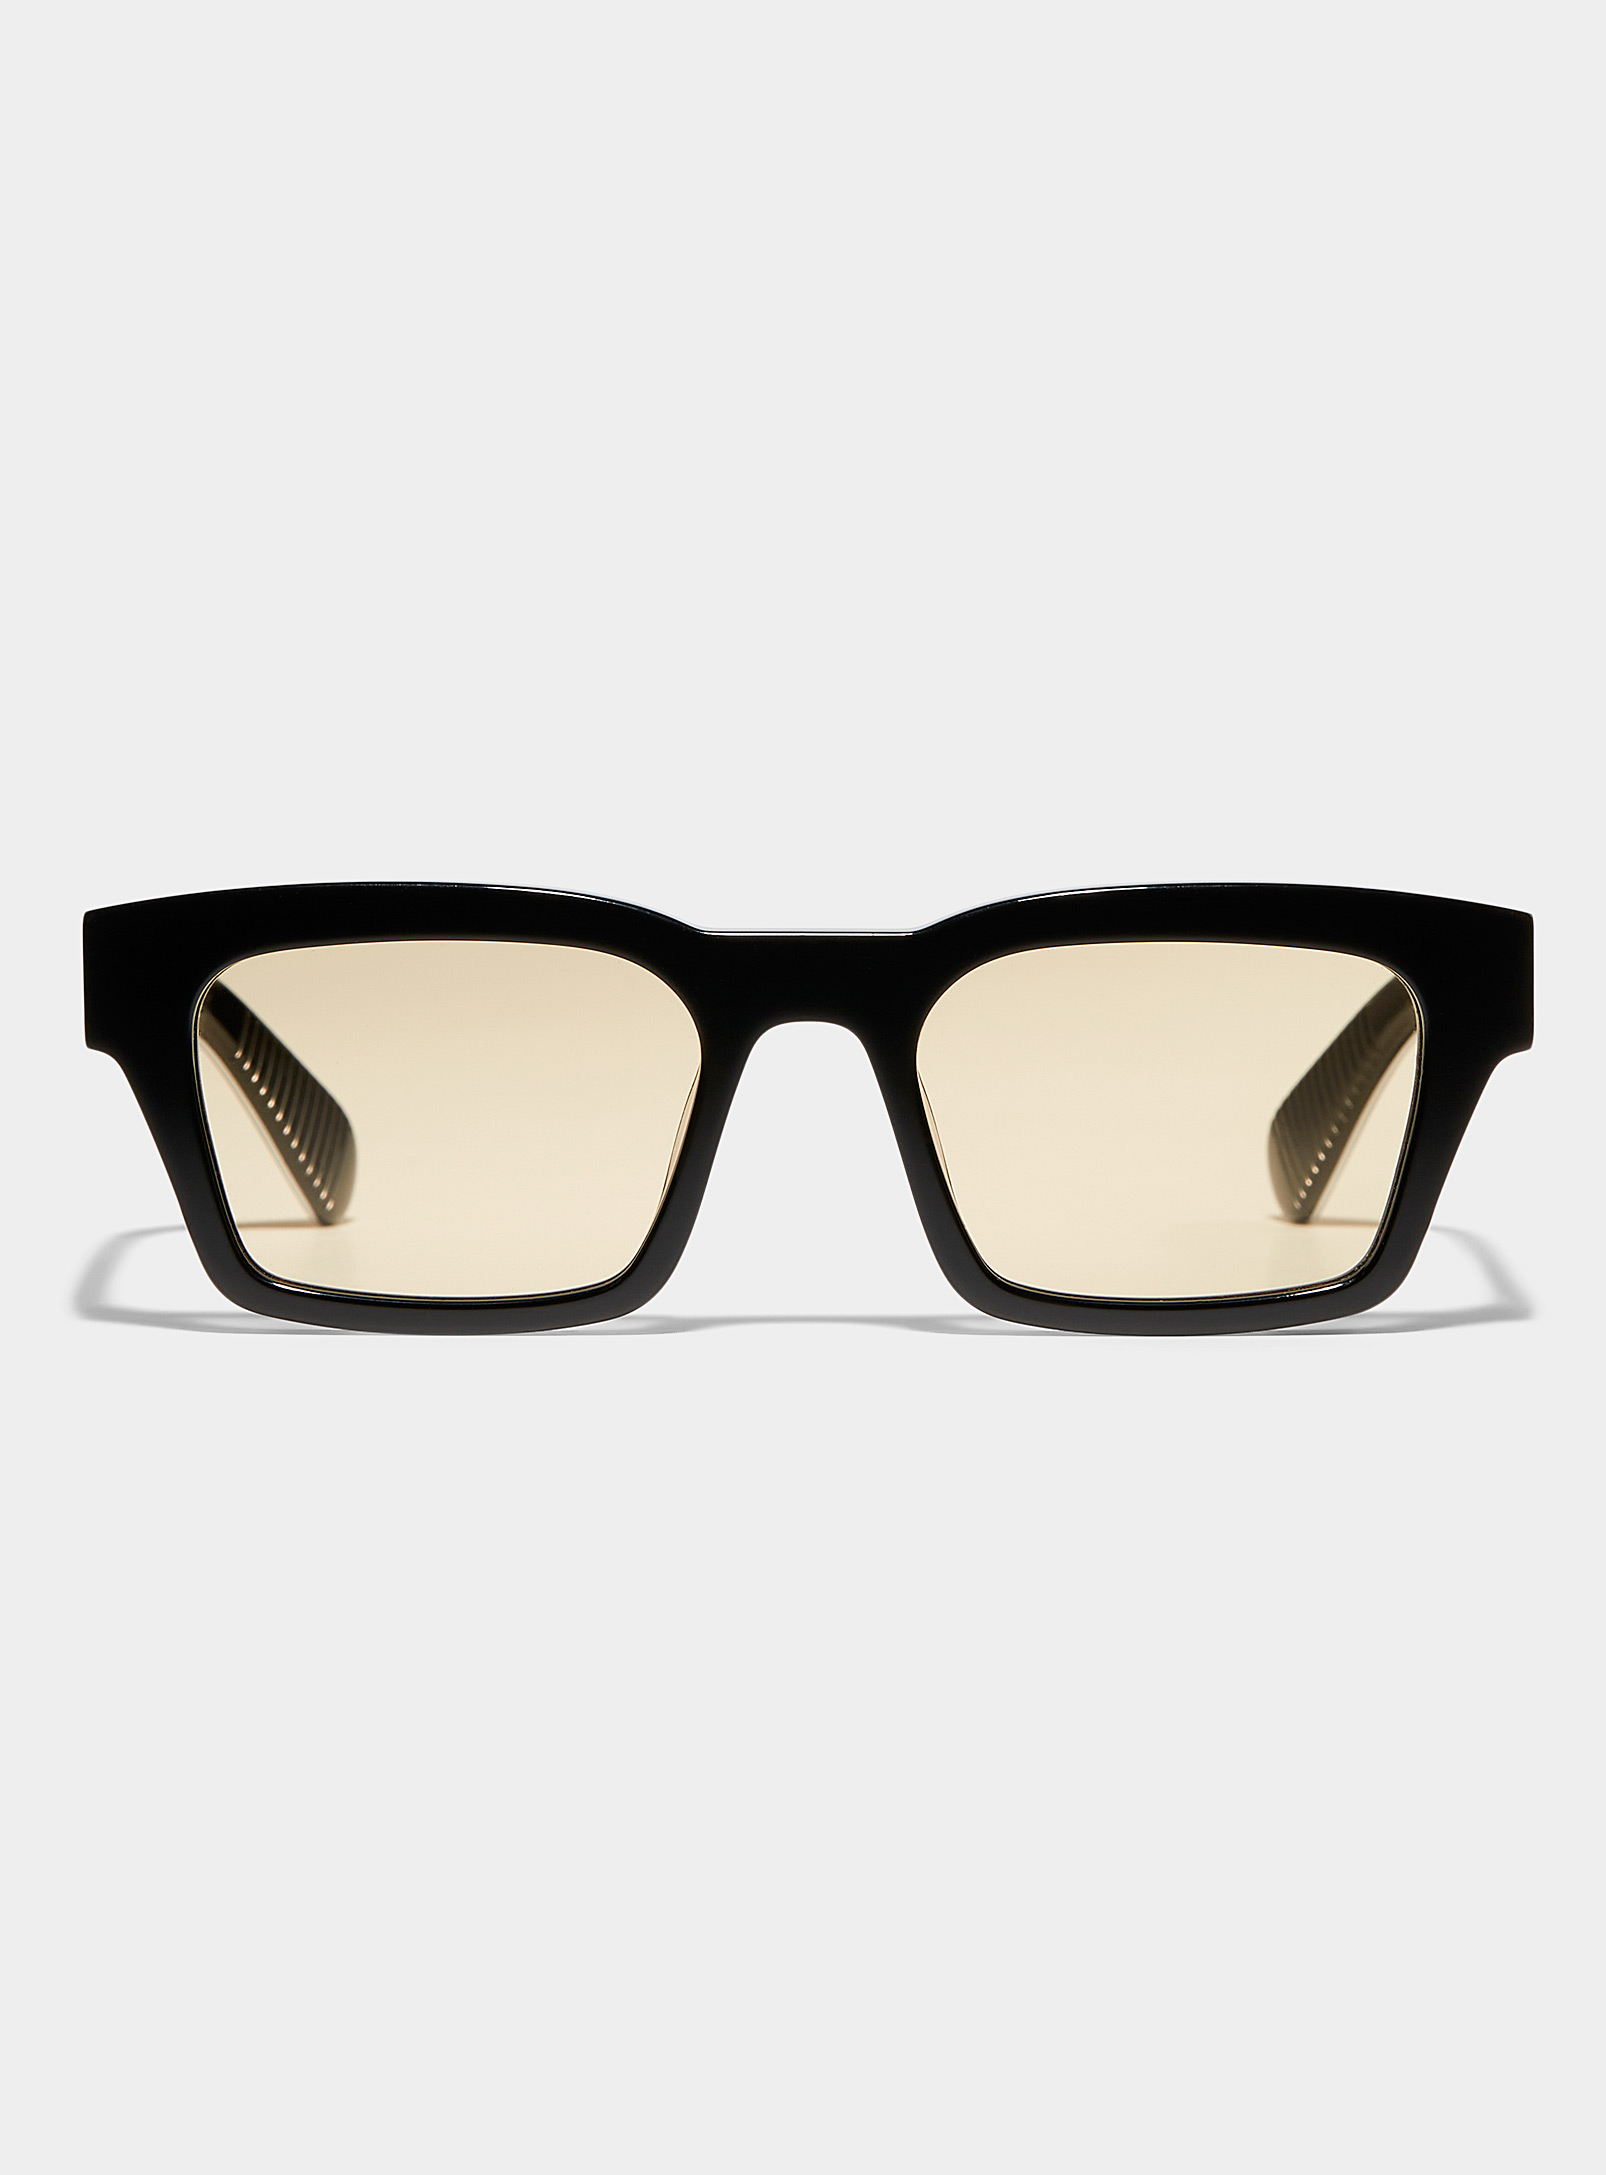 Spitfire Cut Eighty Two Rectangular Sunglasses In Black